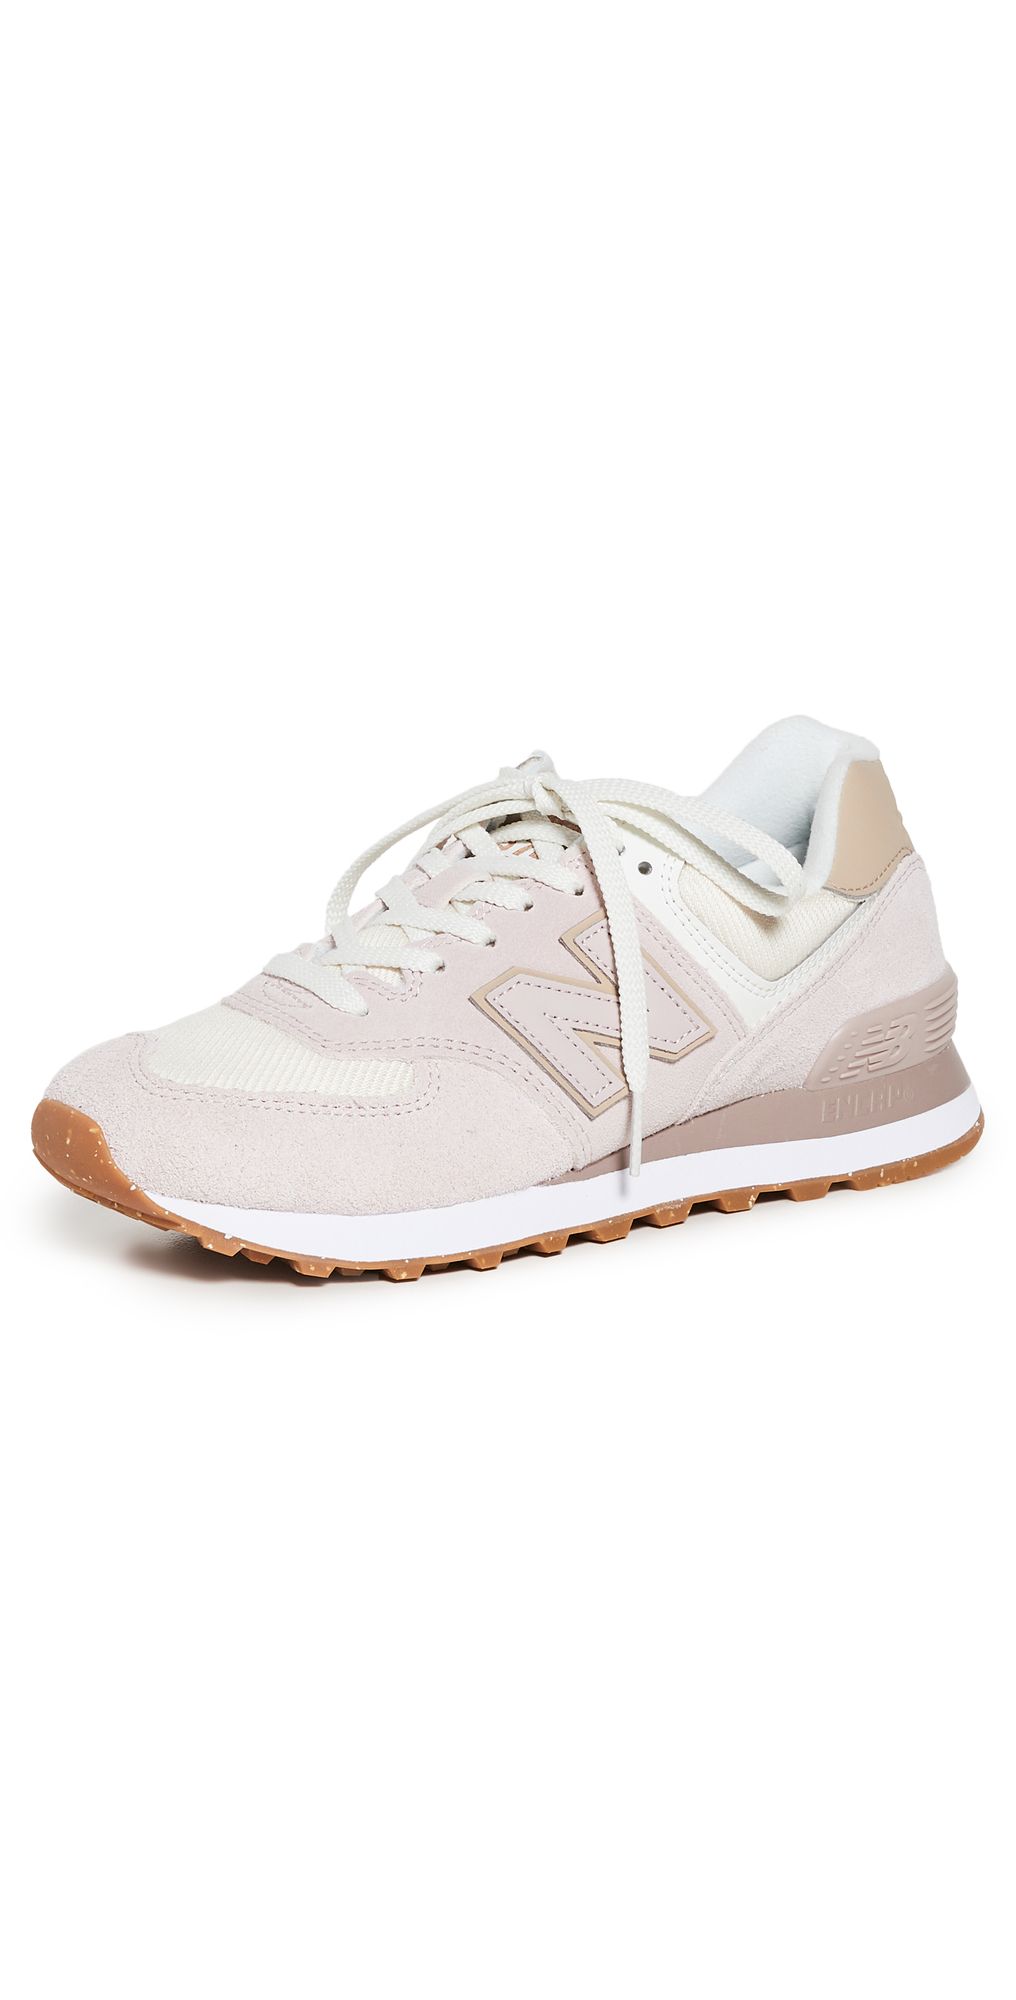 New Balance 574 Classic Sneakers | Shopbop